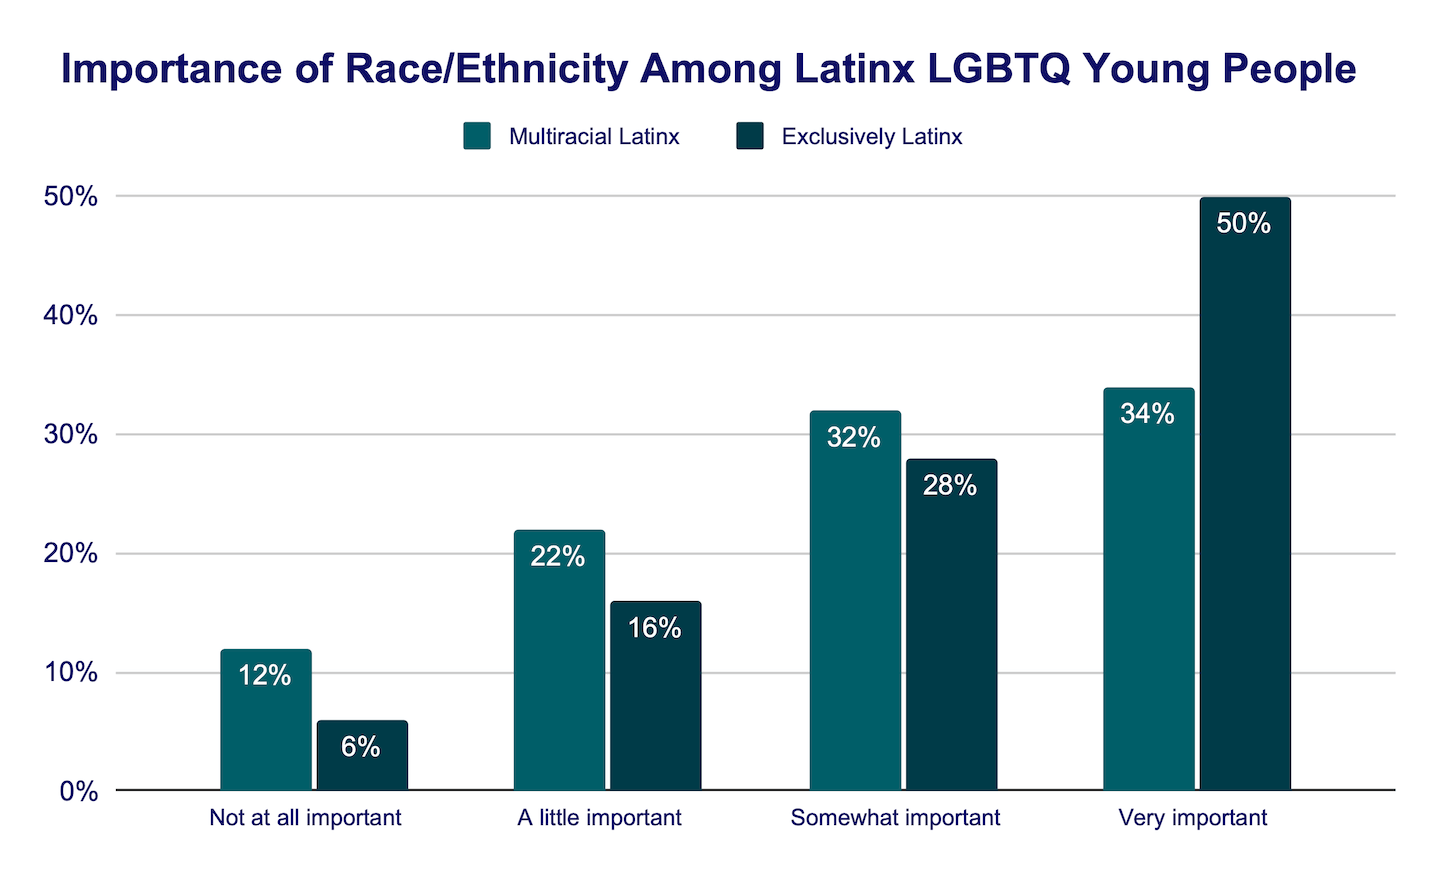 Importance of race/ethnicity among Latinx LGBTQ young people bar graph